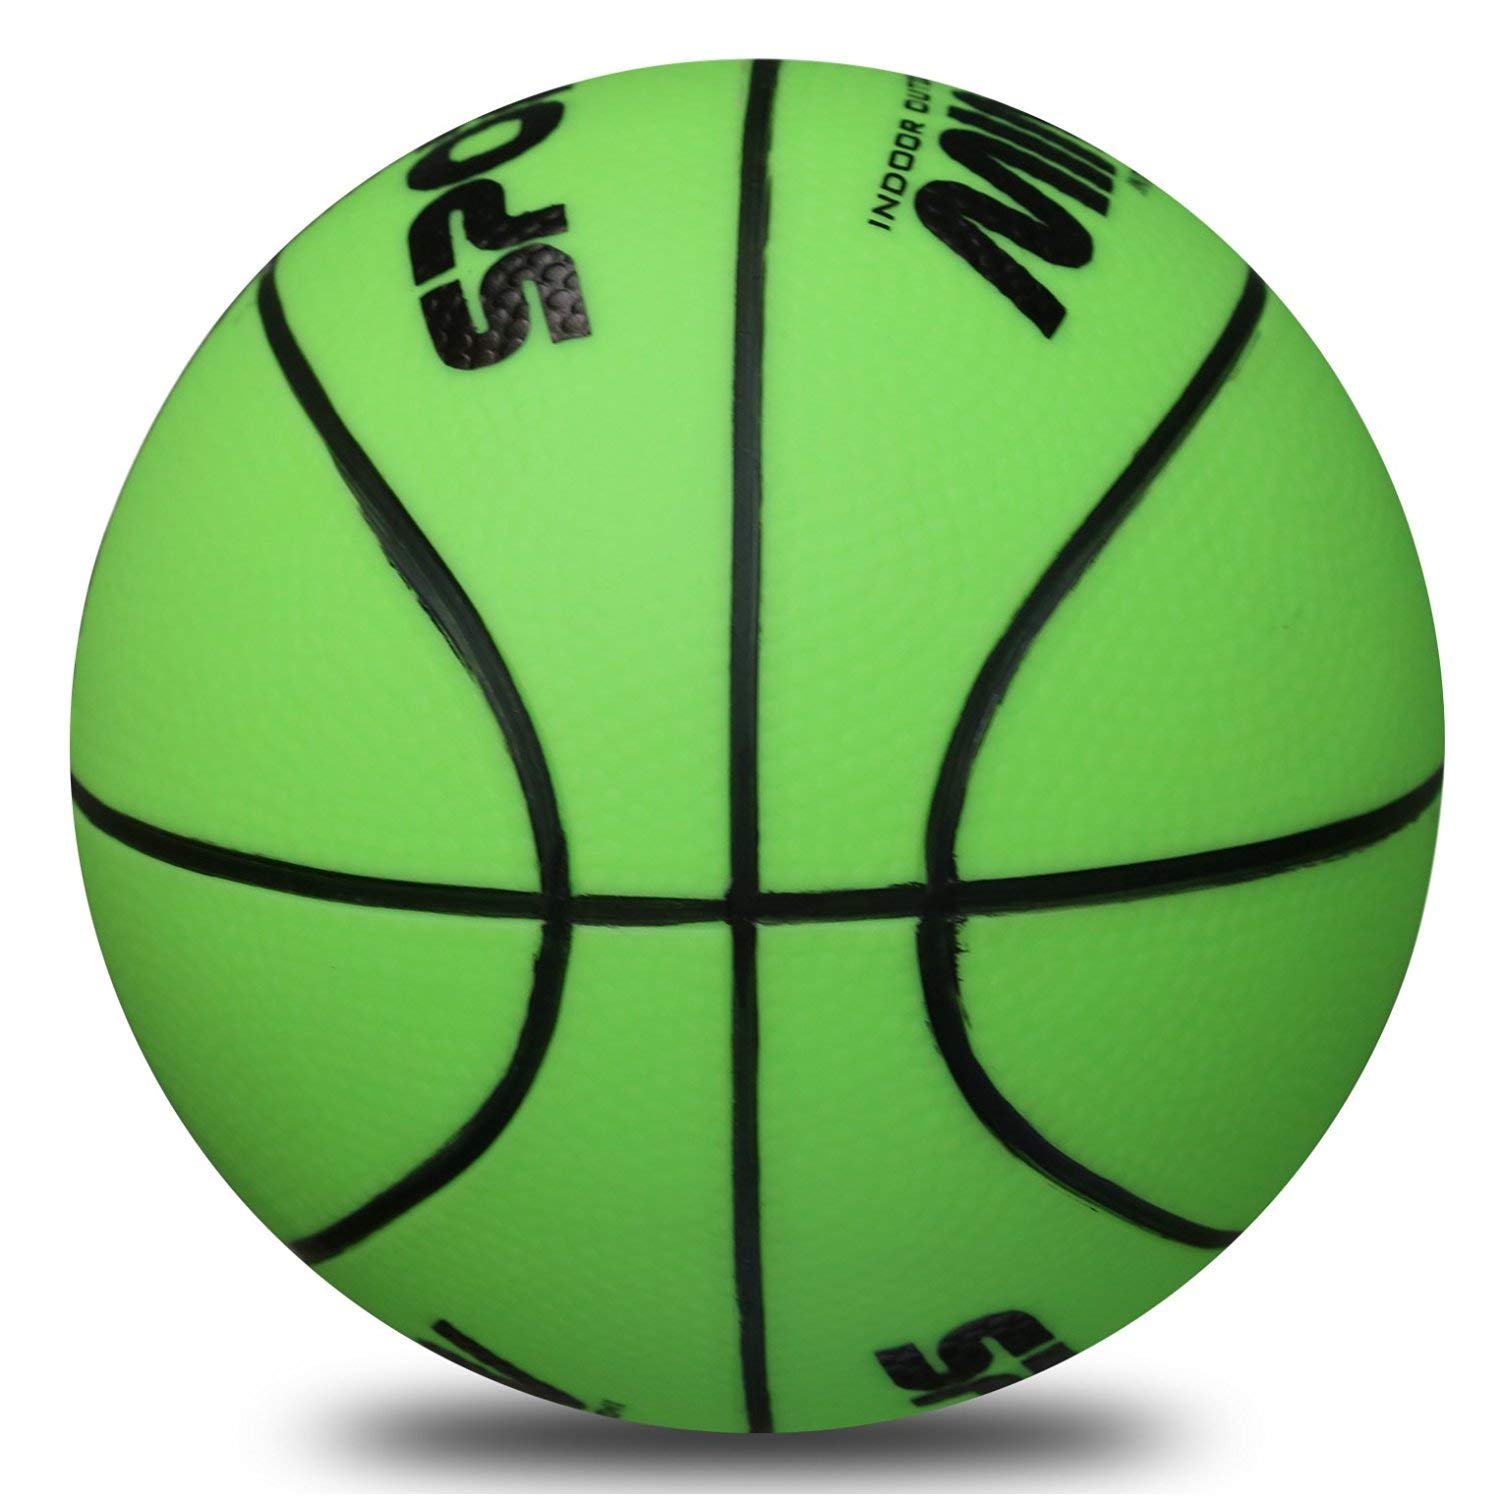 Stylife 5inch Mini Basketball for Kids,Inflatable Ball Environmental Protection Material,Soft and Bouncy,Colors Varied